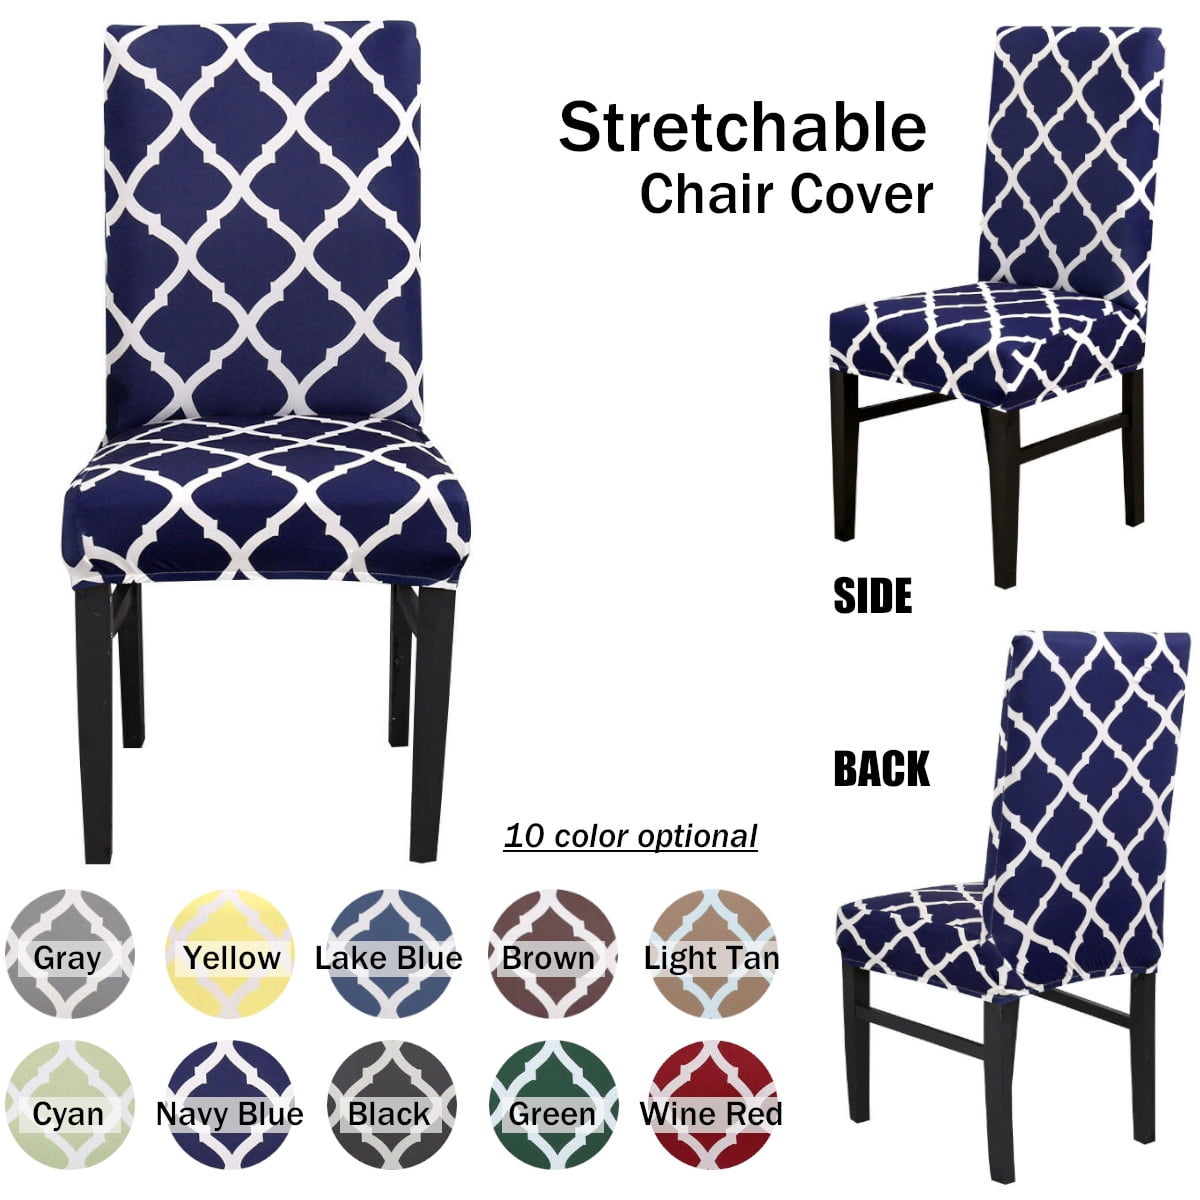 Details about   Solid Color Slipcovers Short Back Chair Cover Washable for Banquet Hotel 